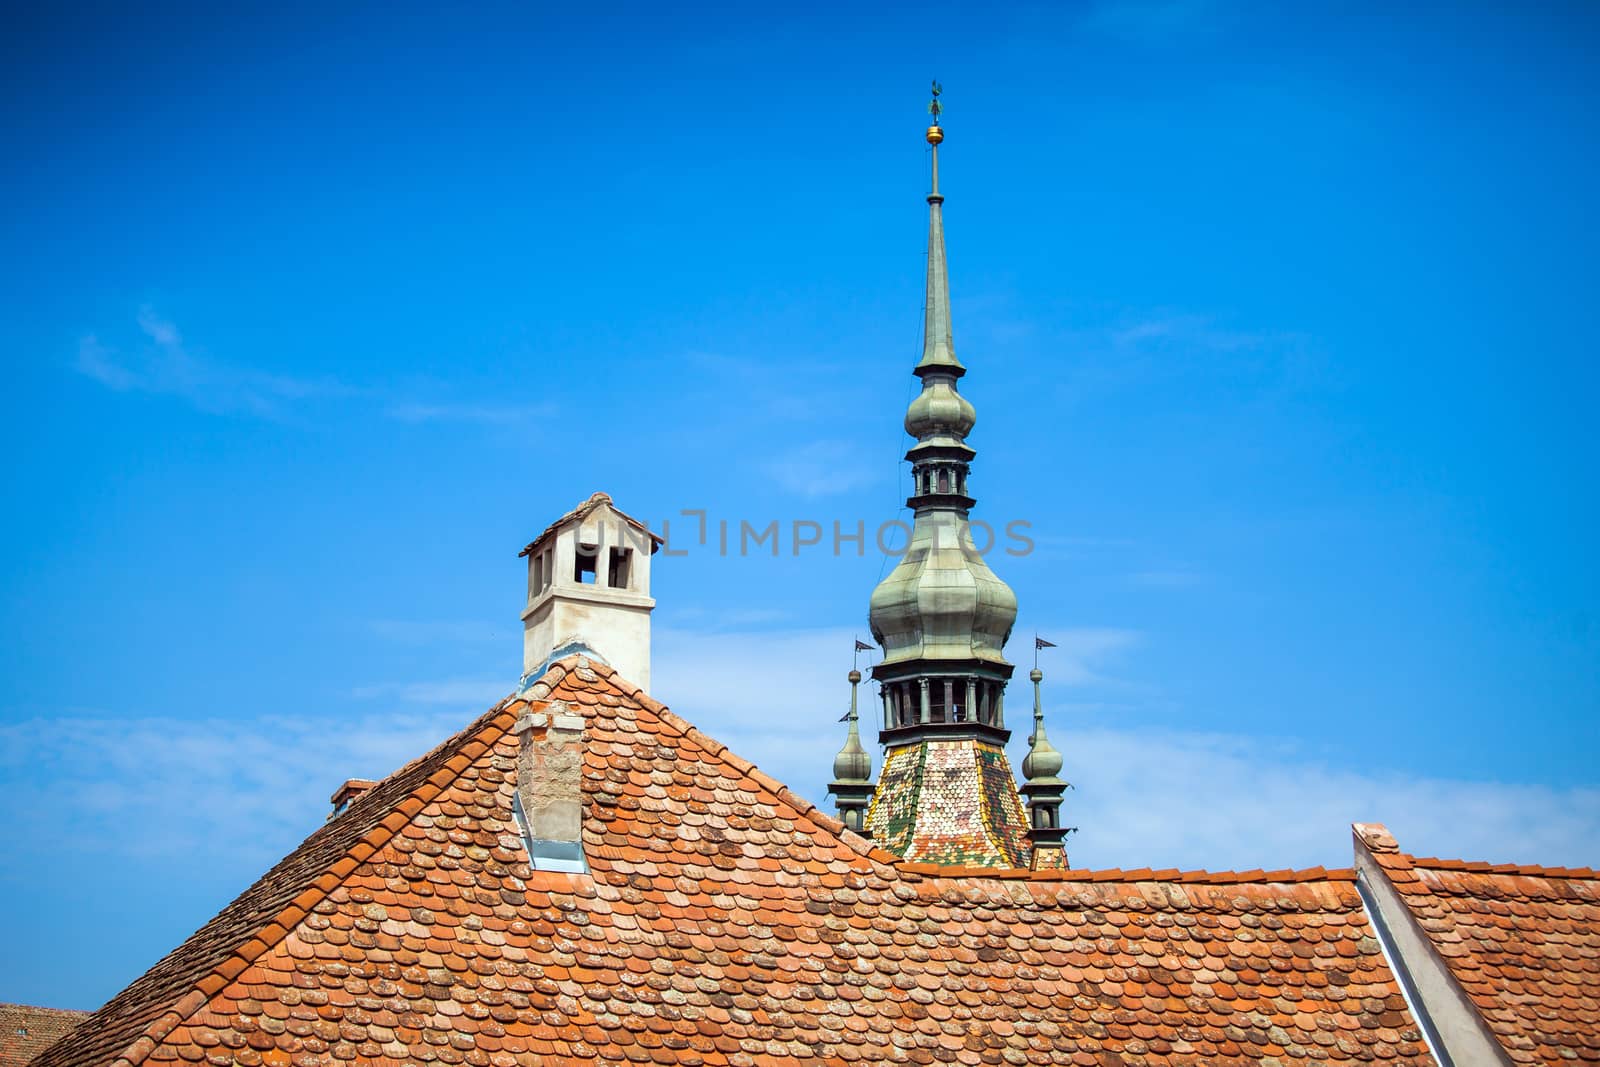 Sighisoara, Romania - June 23, 2013: Clock Tower typical roof and chemnee from Sighisoara fortress, Transylvania, Romania